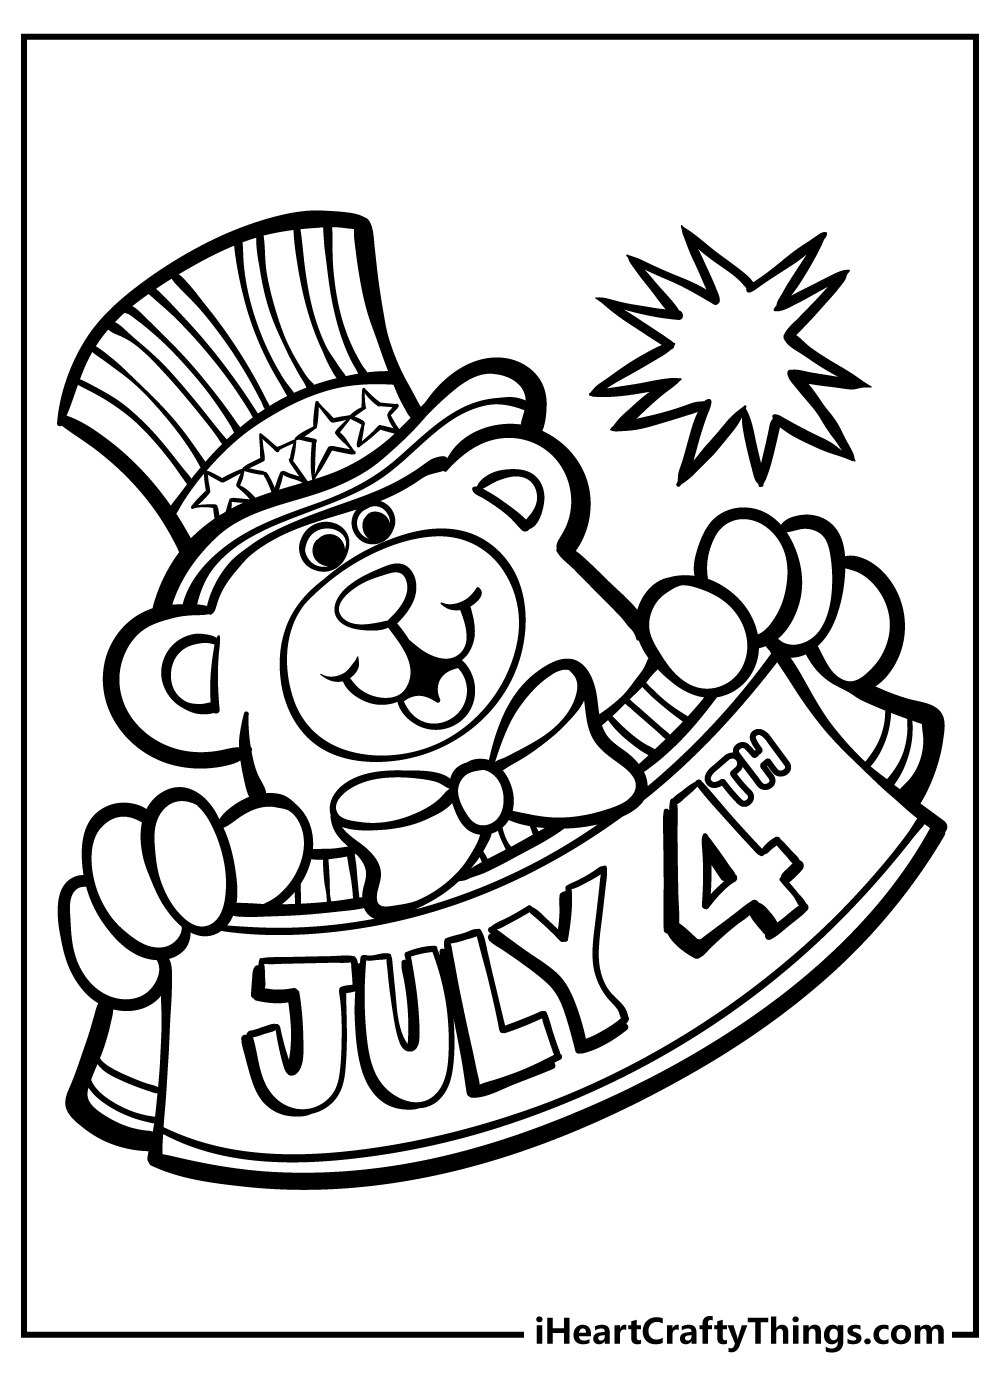 4th Of July Coloring Pages for kids free download